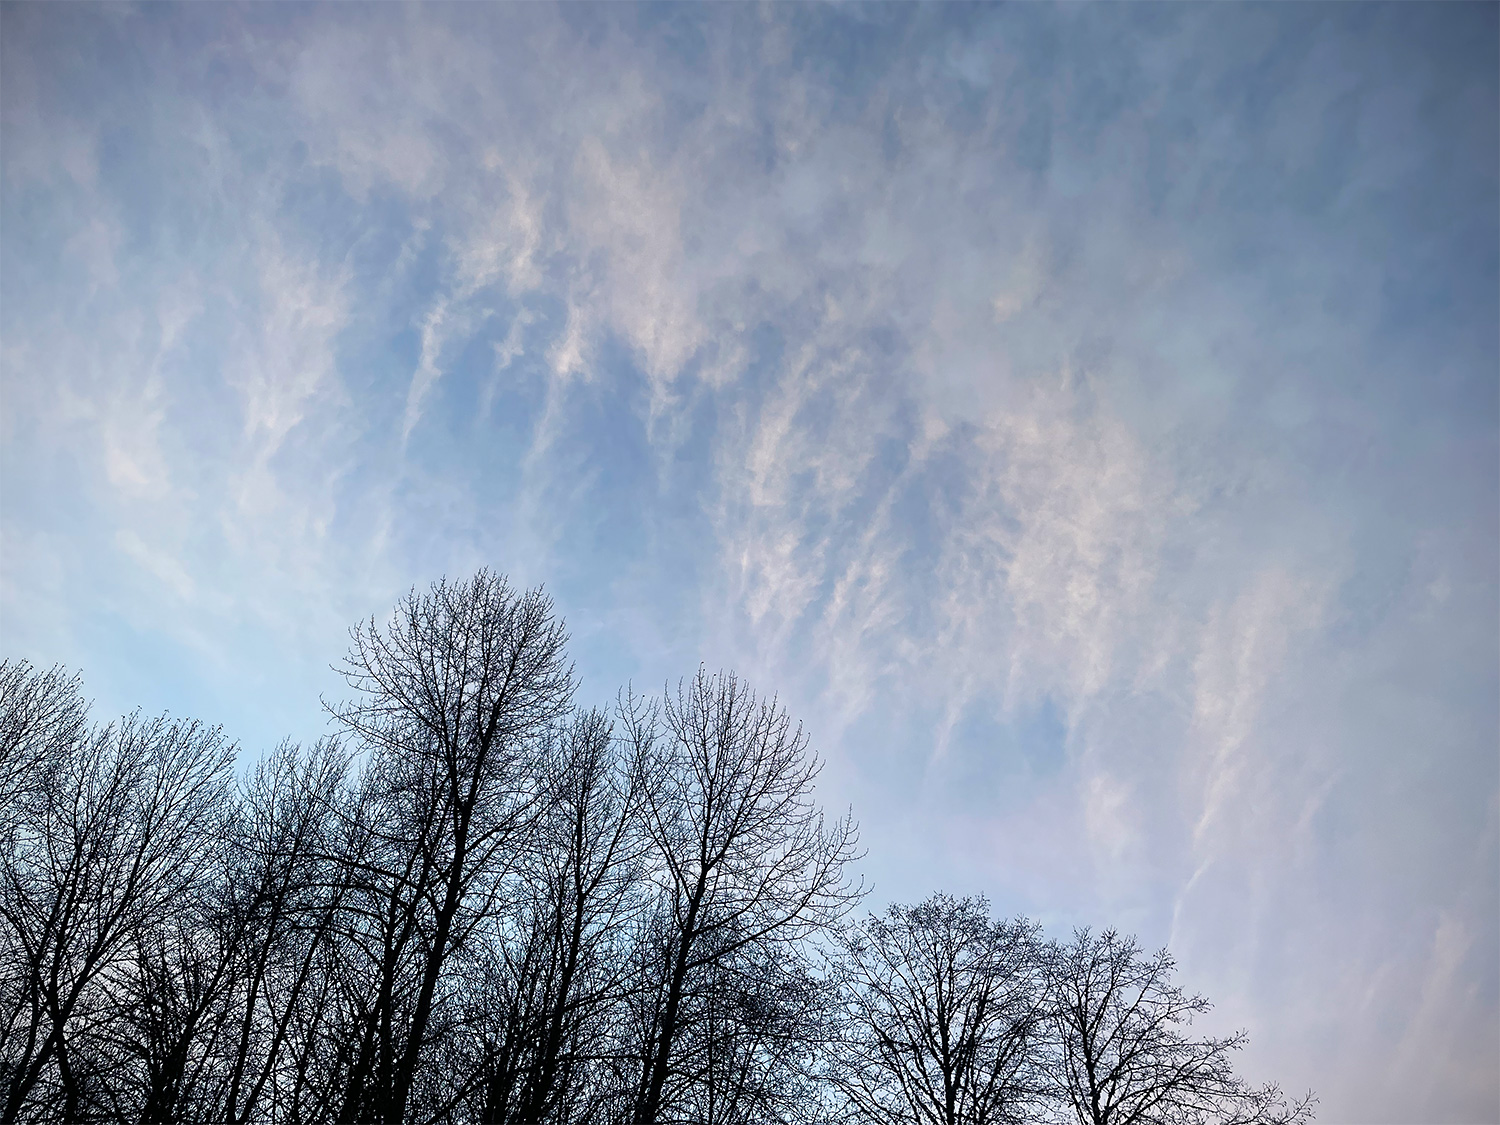 High clouds and bare trees